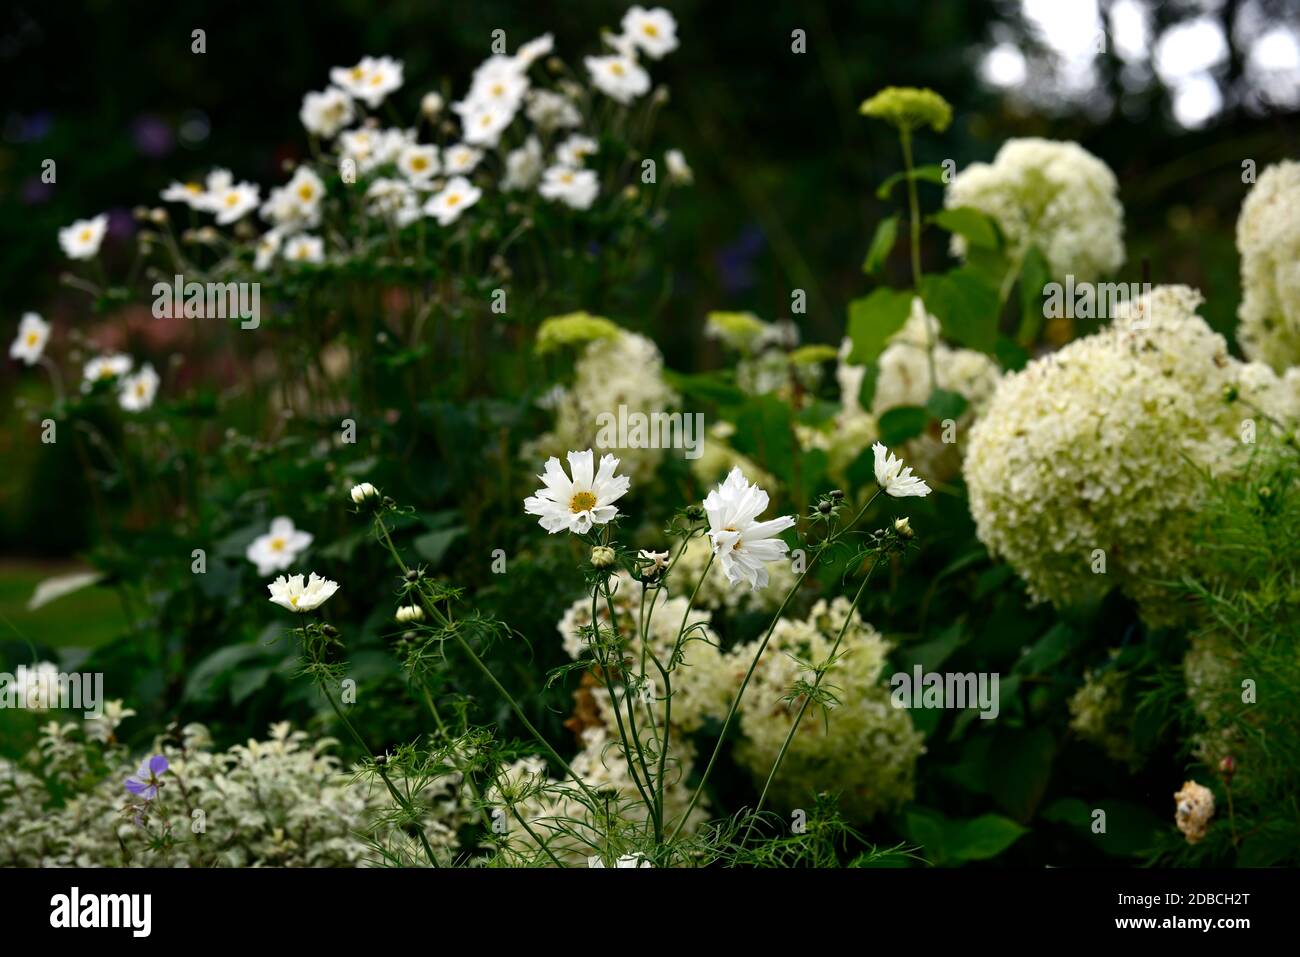 cosmos bipinnatus,white flowers,hydrangea annabelle,anemone japonica,flowering combination,mixed flowers,mixed planting scheme,RM Floral Stock Photo